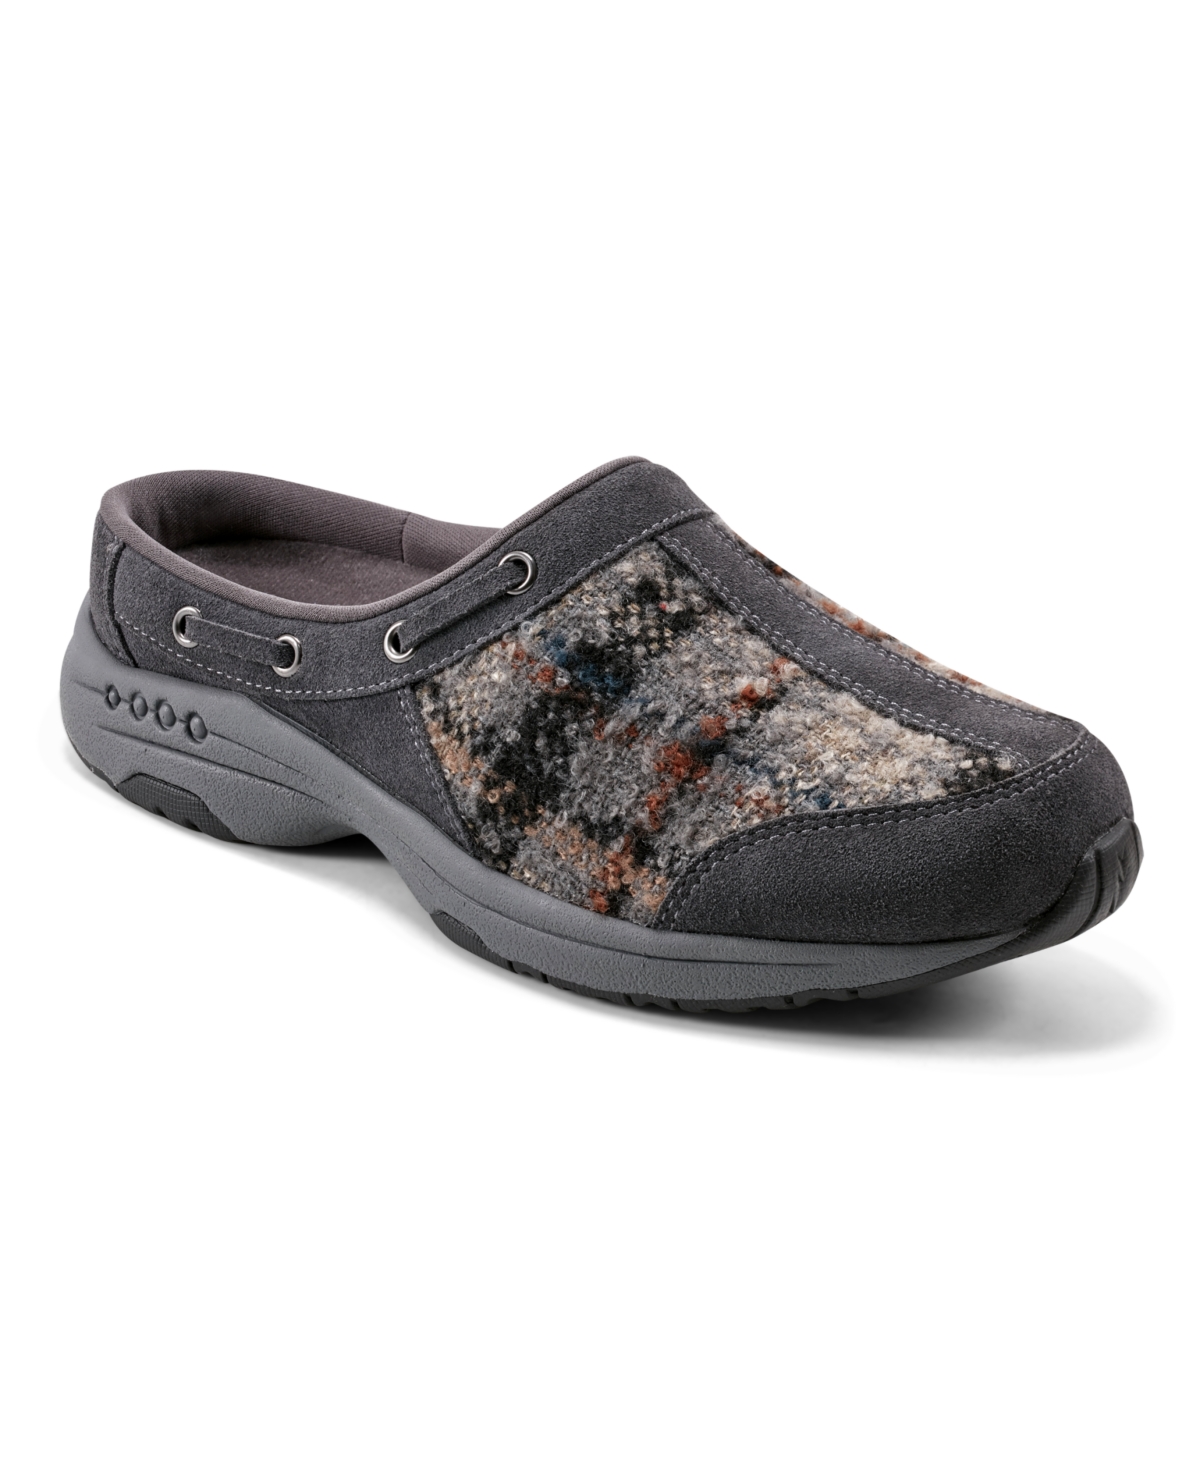 Women's Travelport Round Toe Casual Slip-on Mules - Grey Suede